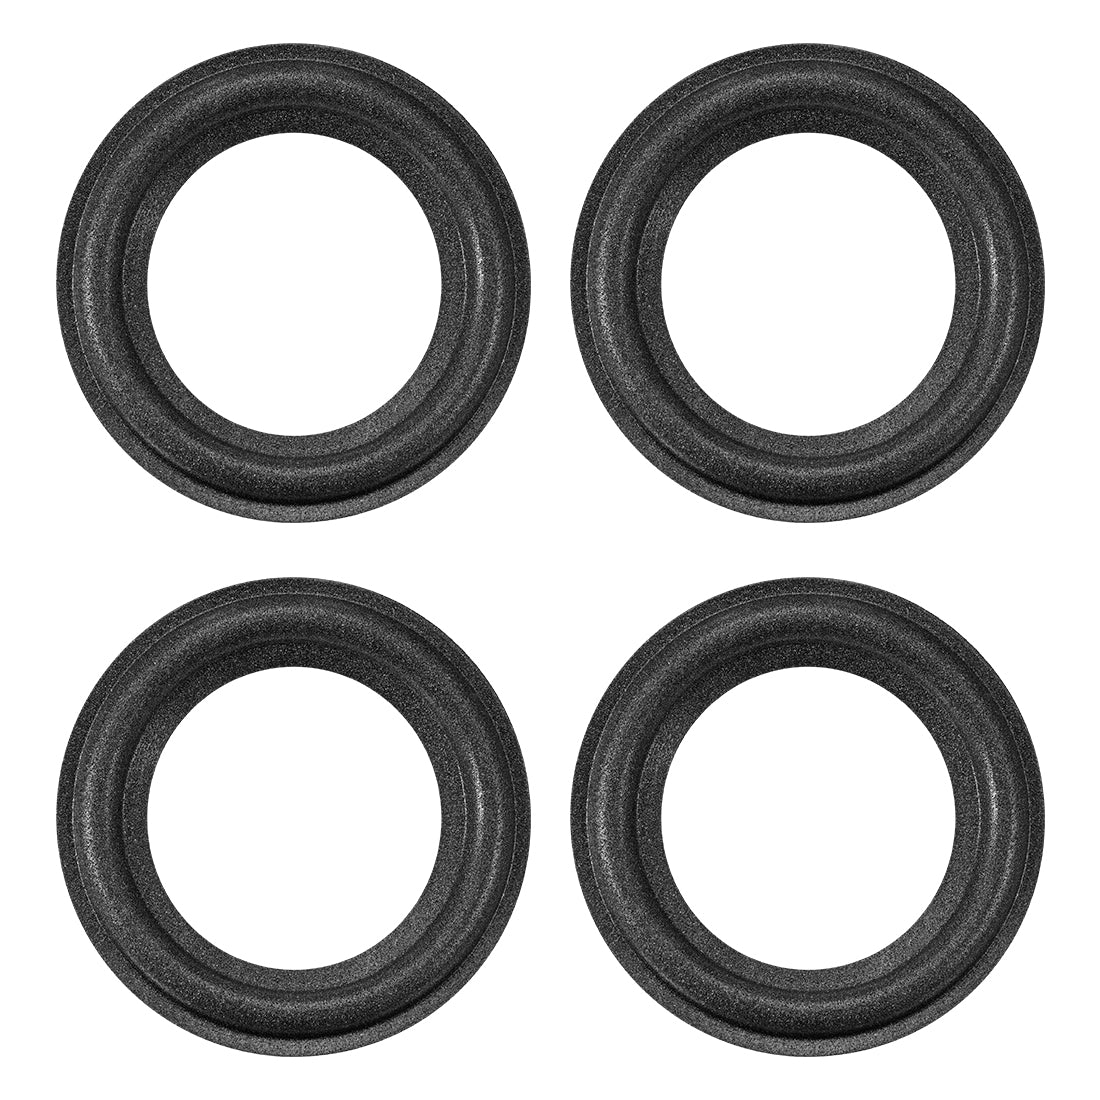 uxcell Uxcell 2.5"  2.5 Inches Foam Edge Surround Rings Replacement Parts for 4pcs